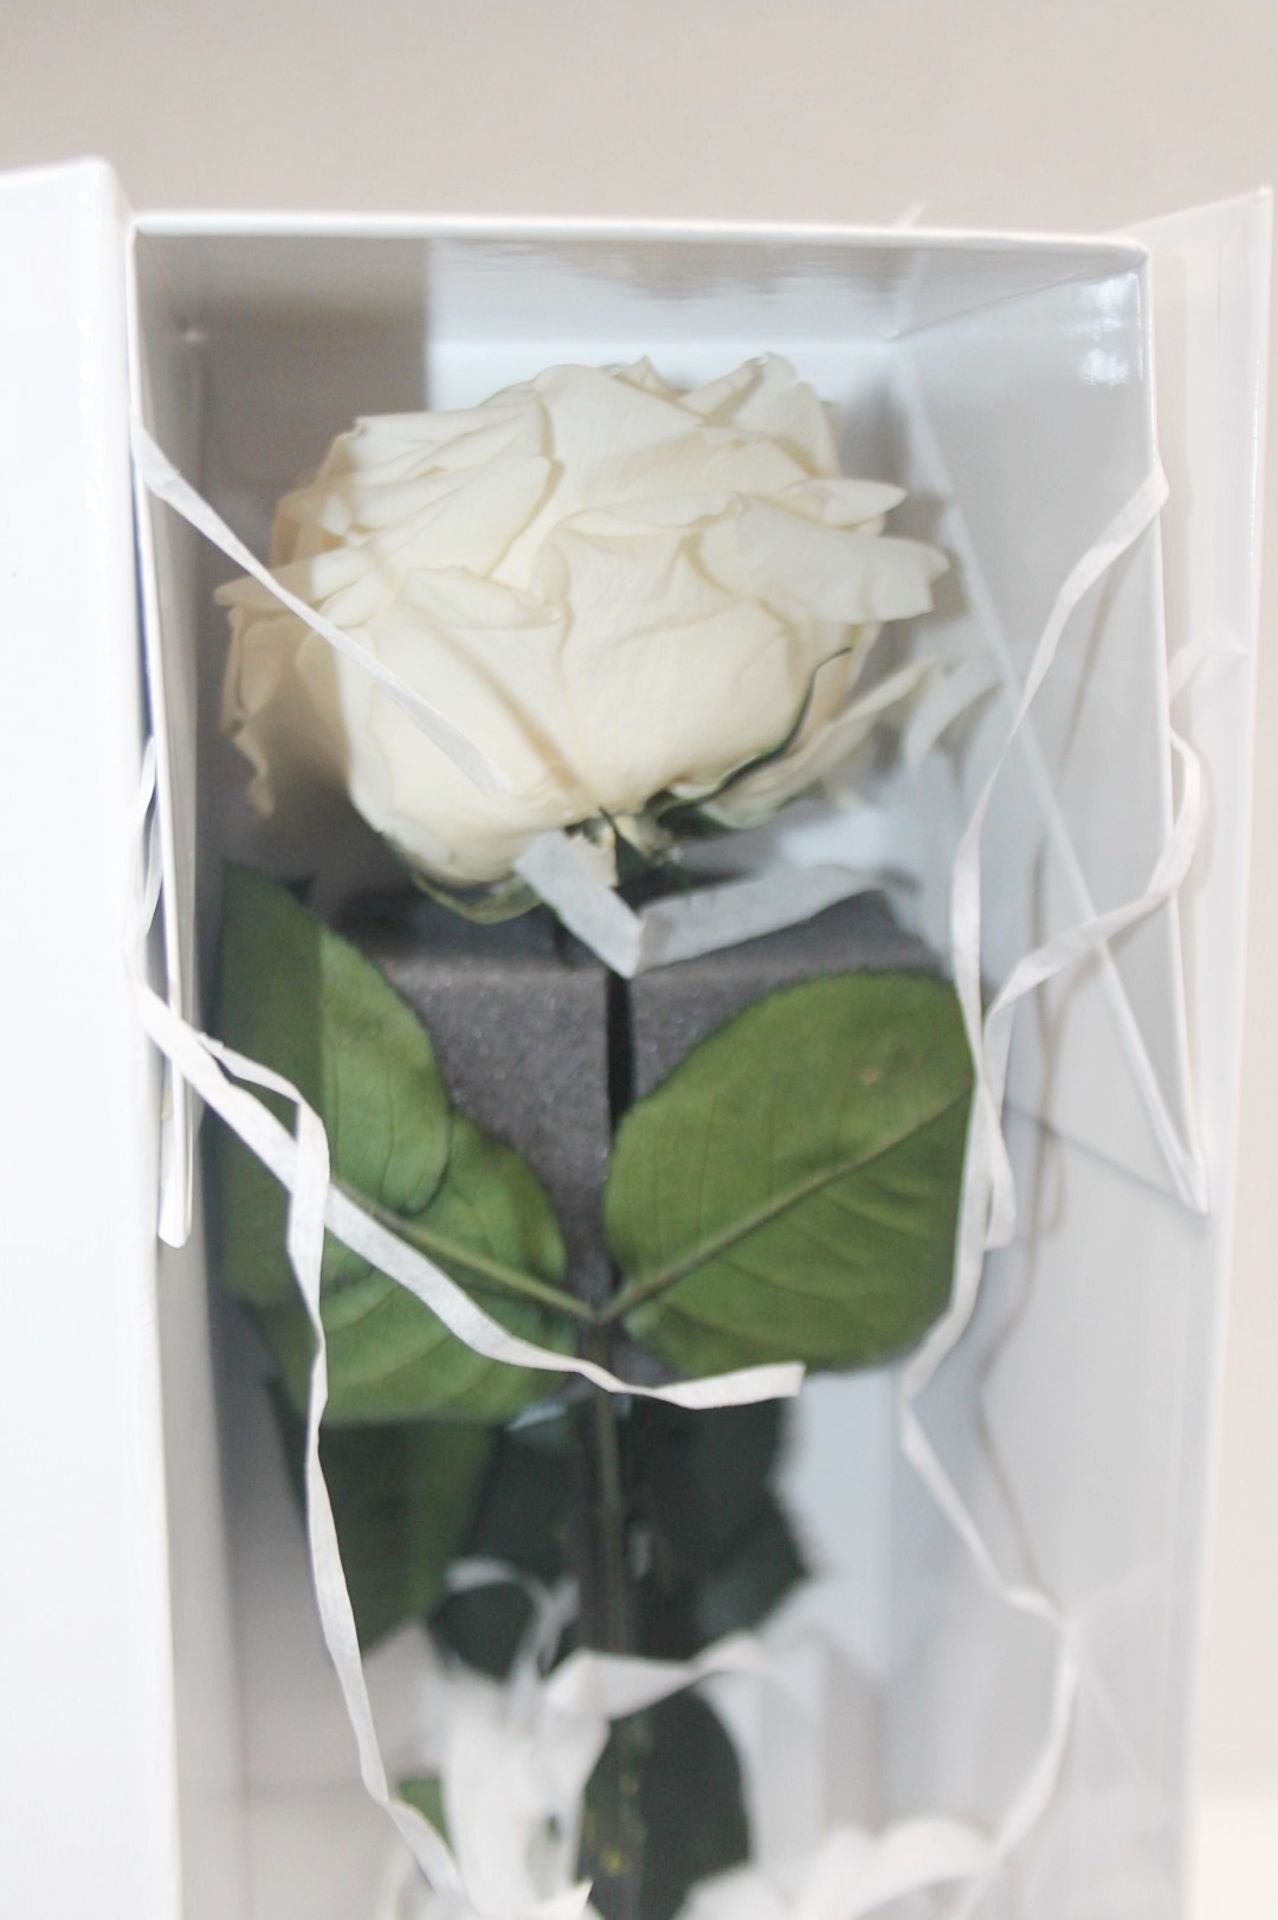 1 x ETHERAL BLOOMS Preserved Single White Rose - Original Price £45.00 - Image 2 of 4